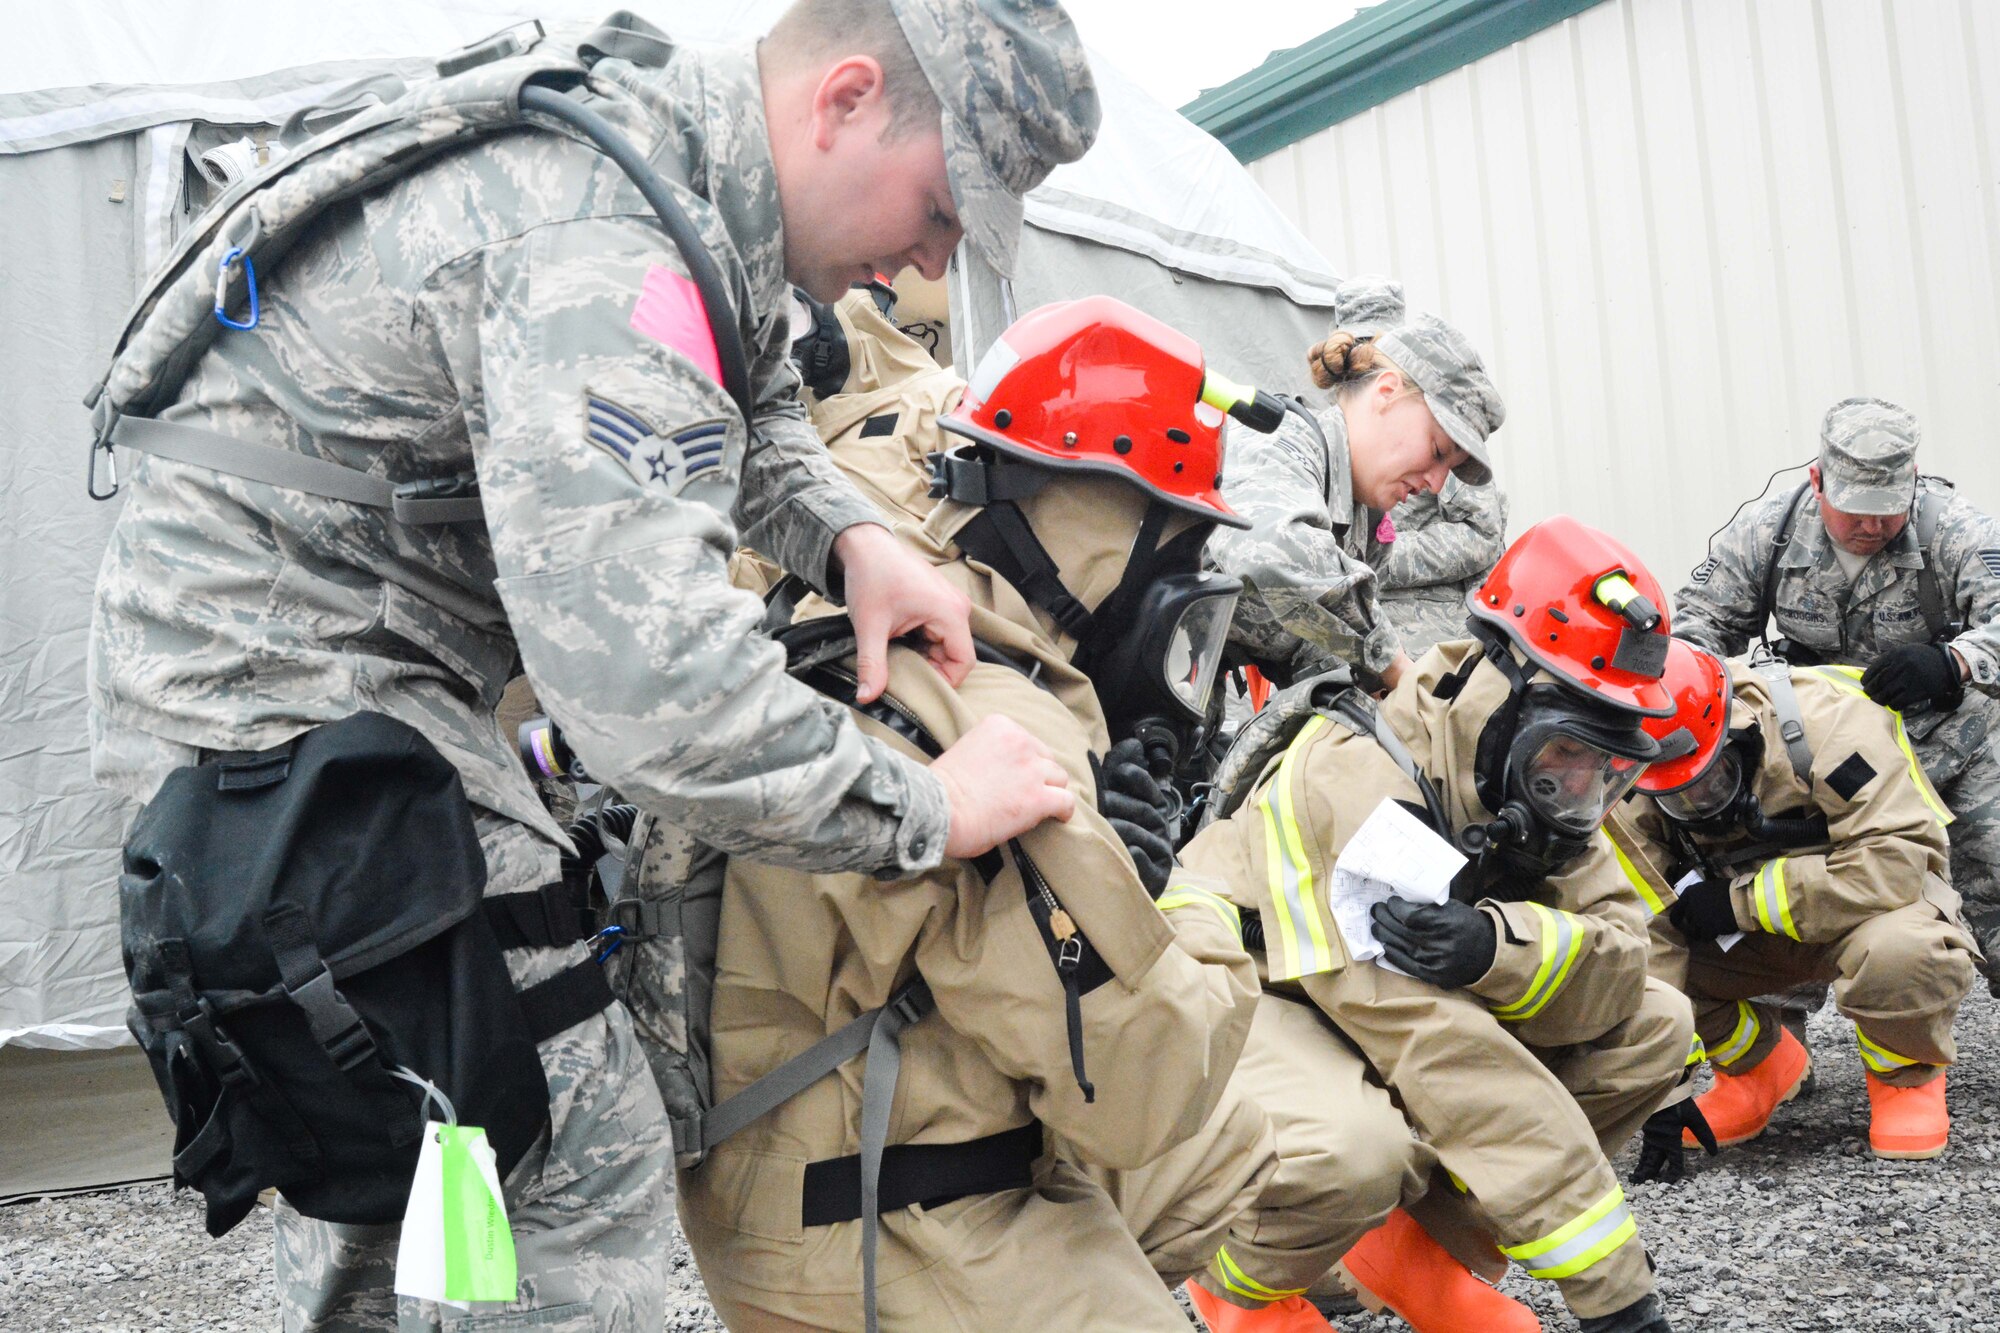 U.S. Airmen assigned to the Fatality Search and Recovery Team of the Missouri National Guard's Homeland Response Force don protective equipment at Camp Gruber in Braggs, Okla., March 19, 2015. The guardsmen were evaluated on their ability to respond to a large scale natural disaster or terrorist attack. (U.S. Air National Guard photo by Airman 1st Class Chayla Hurd/Released)